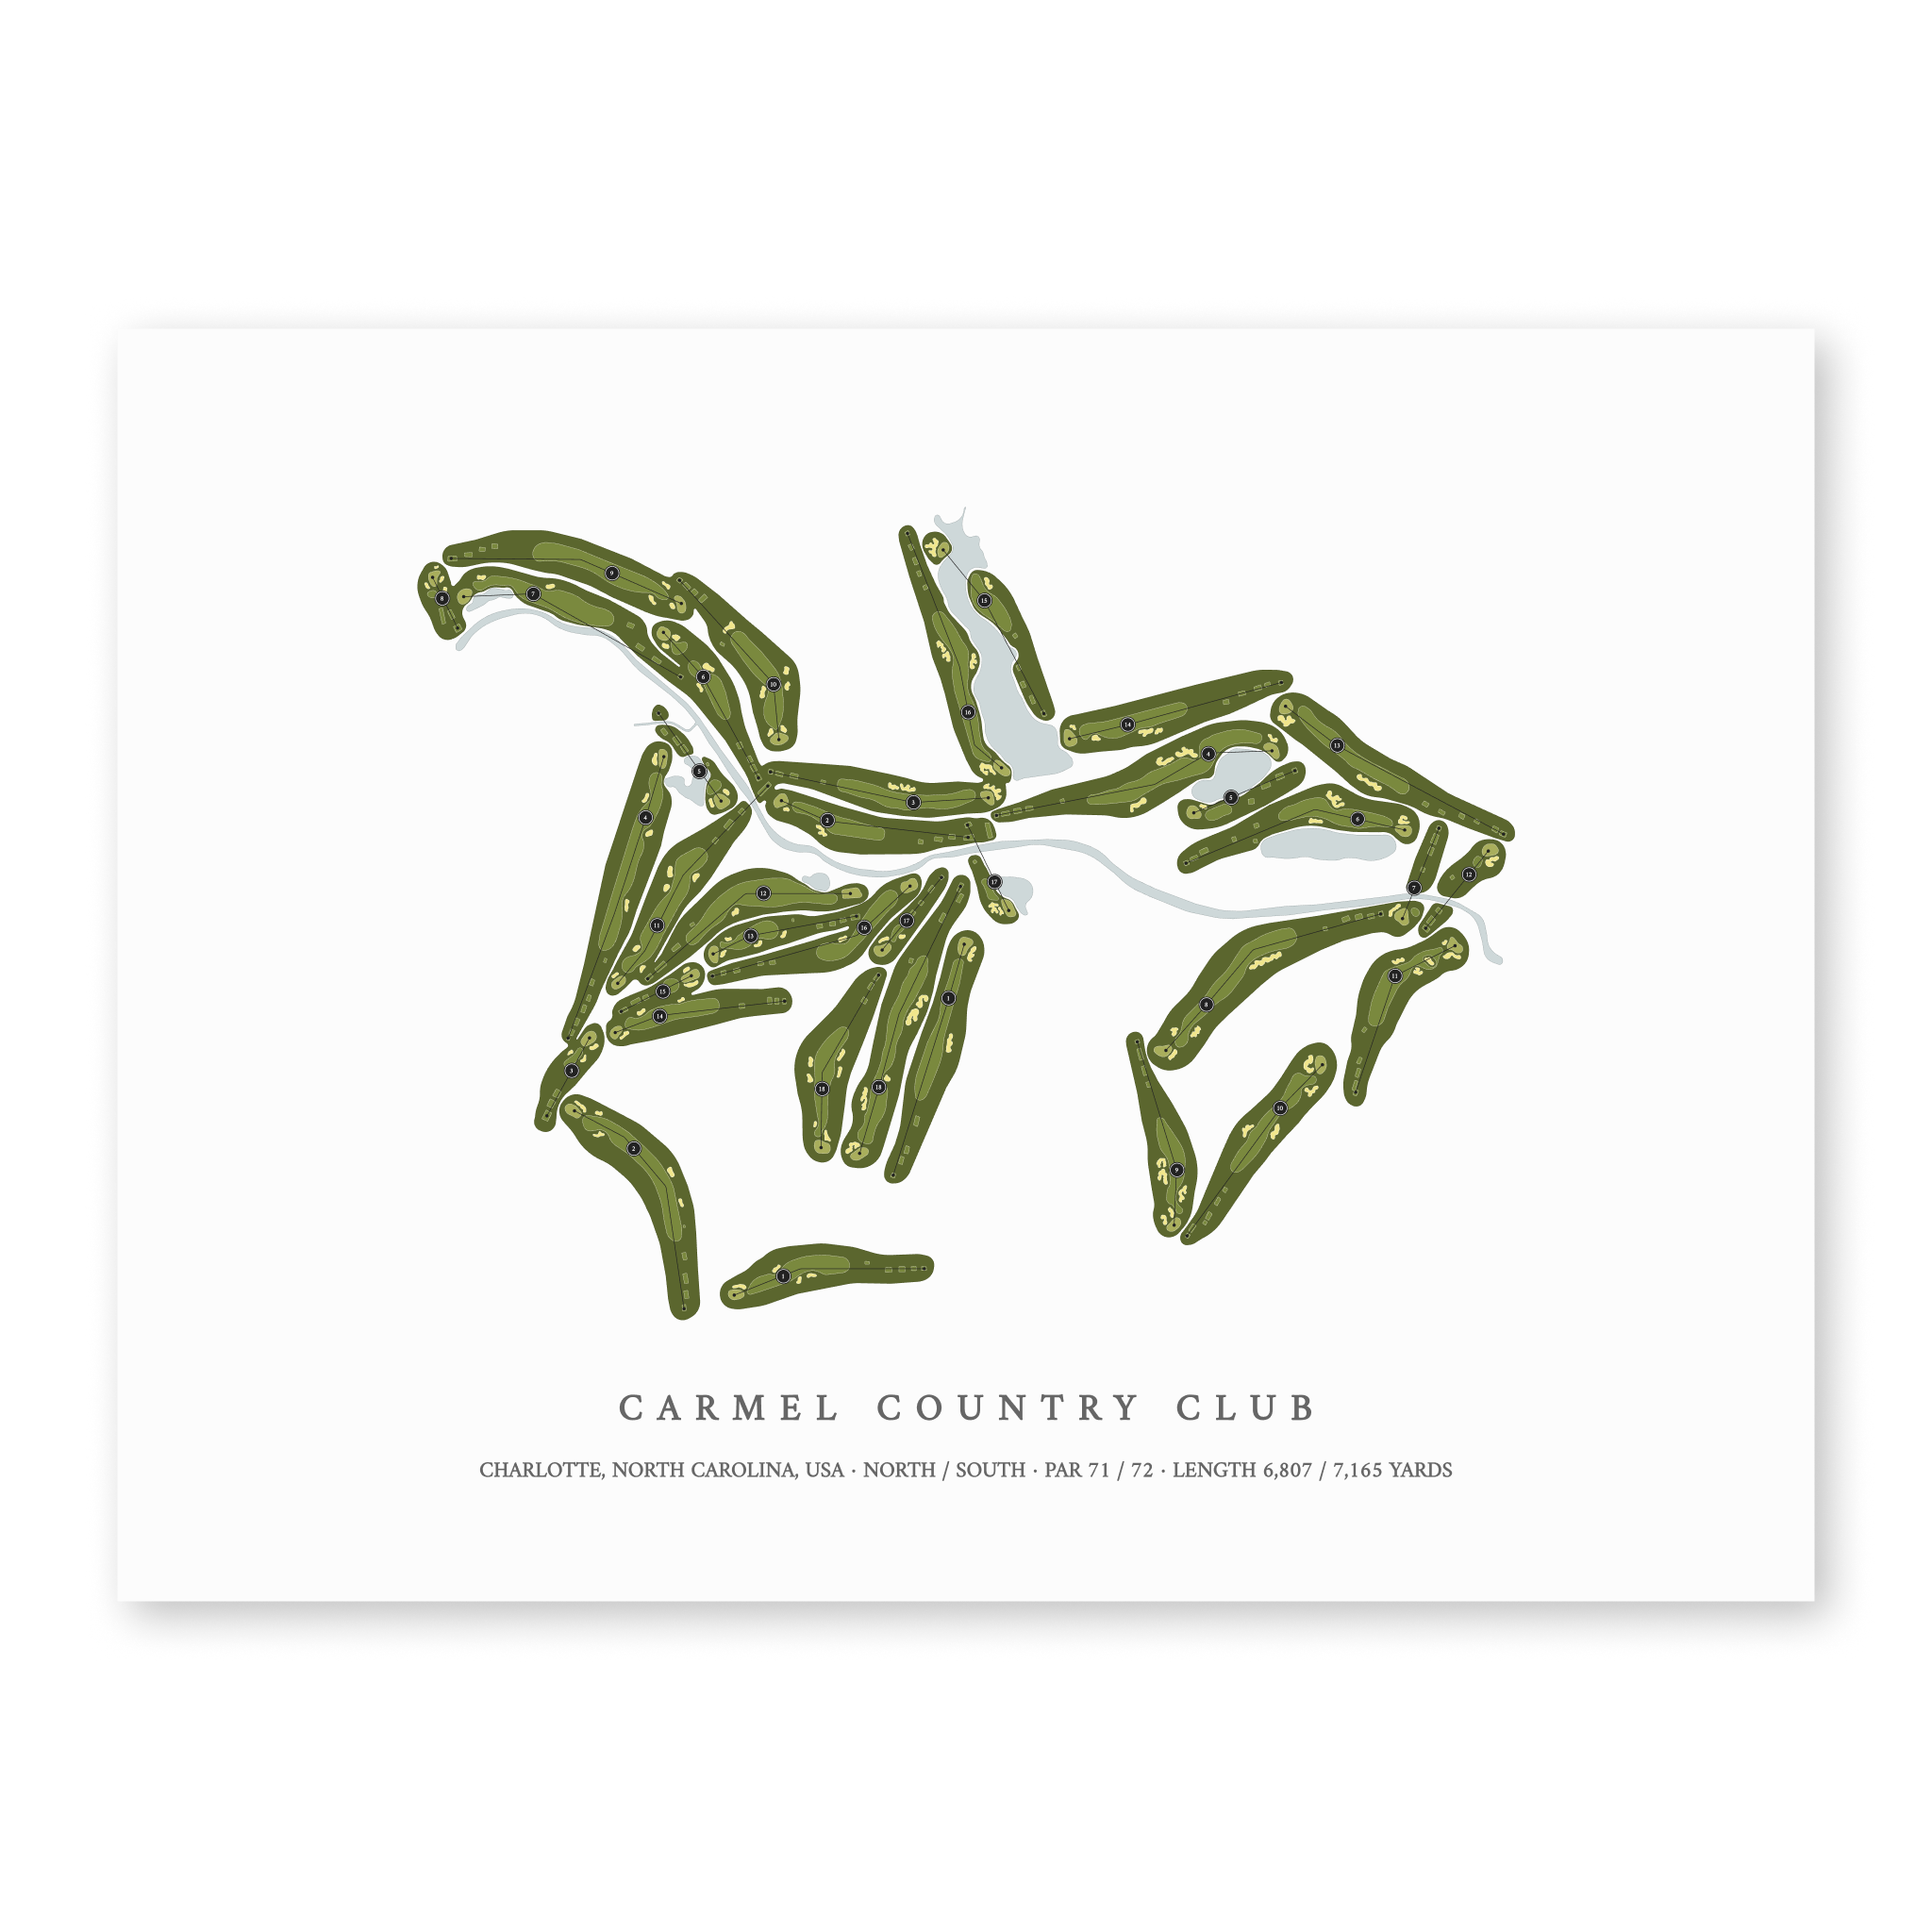 Carmel Country Club | Golf Course Map | Unframed With Hole Numbers #hole numbers_yes